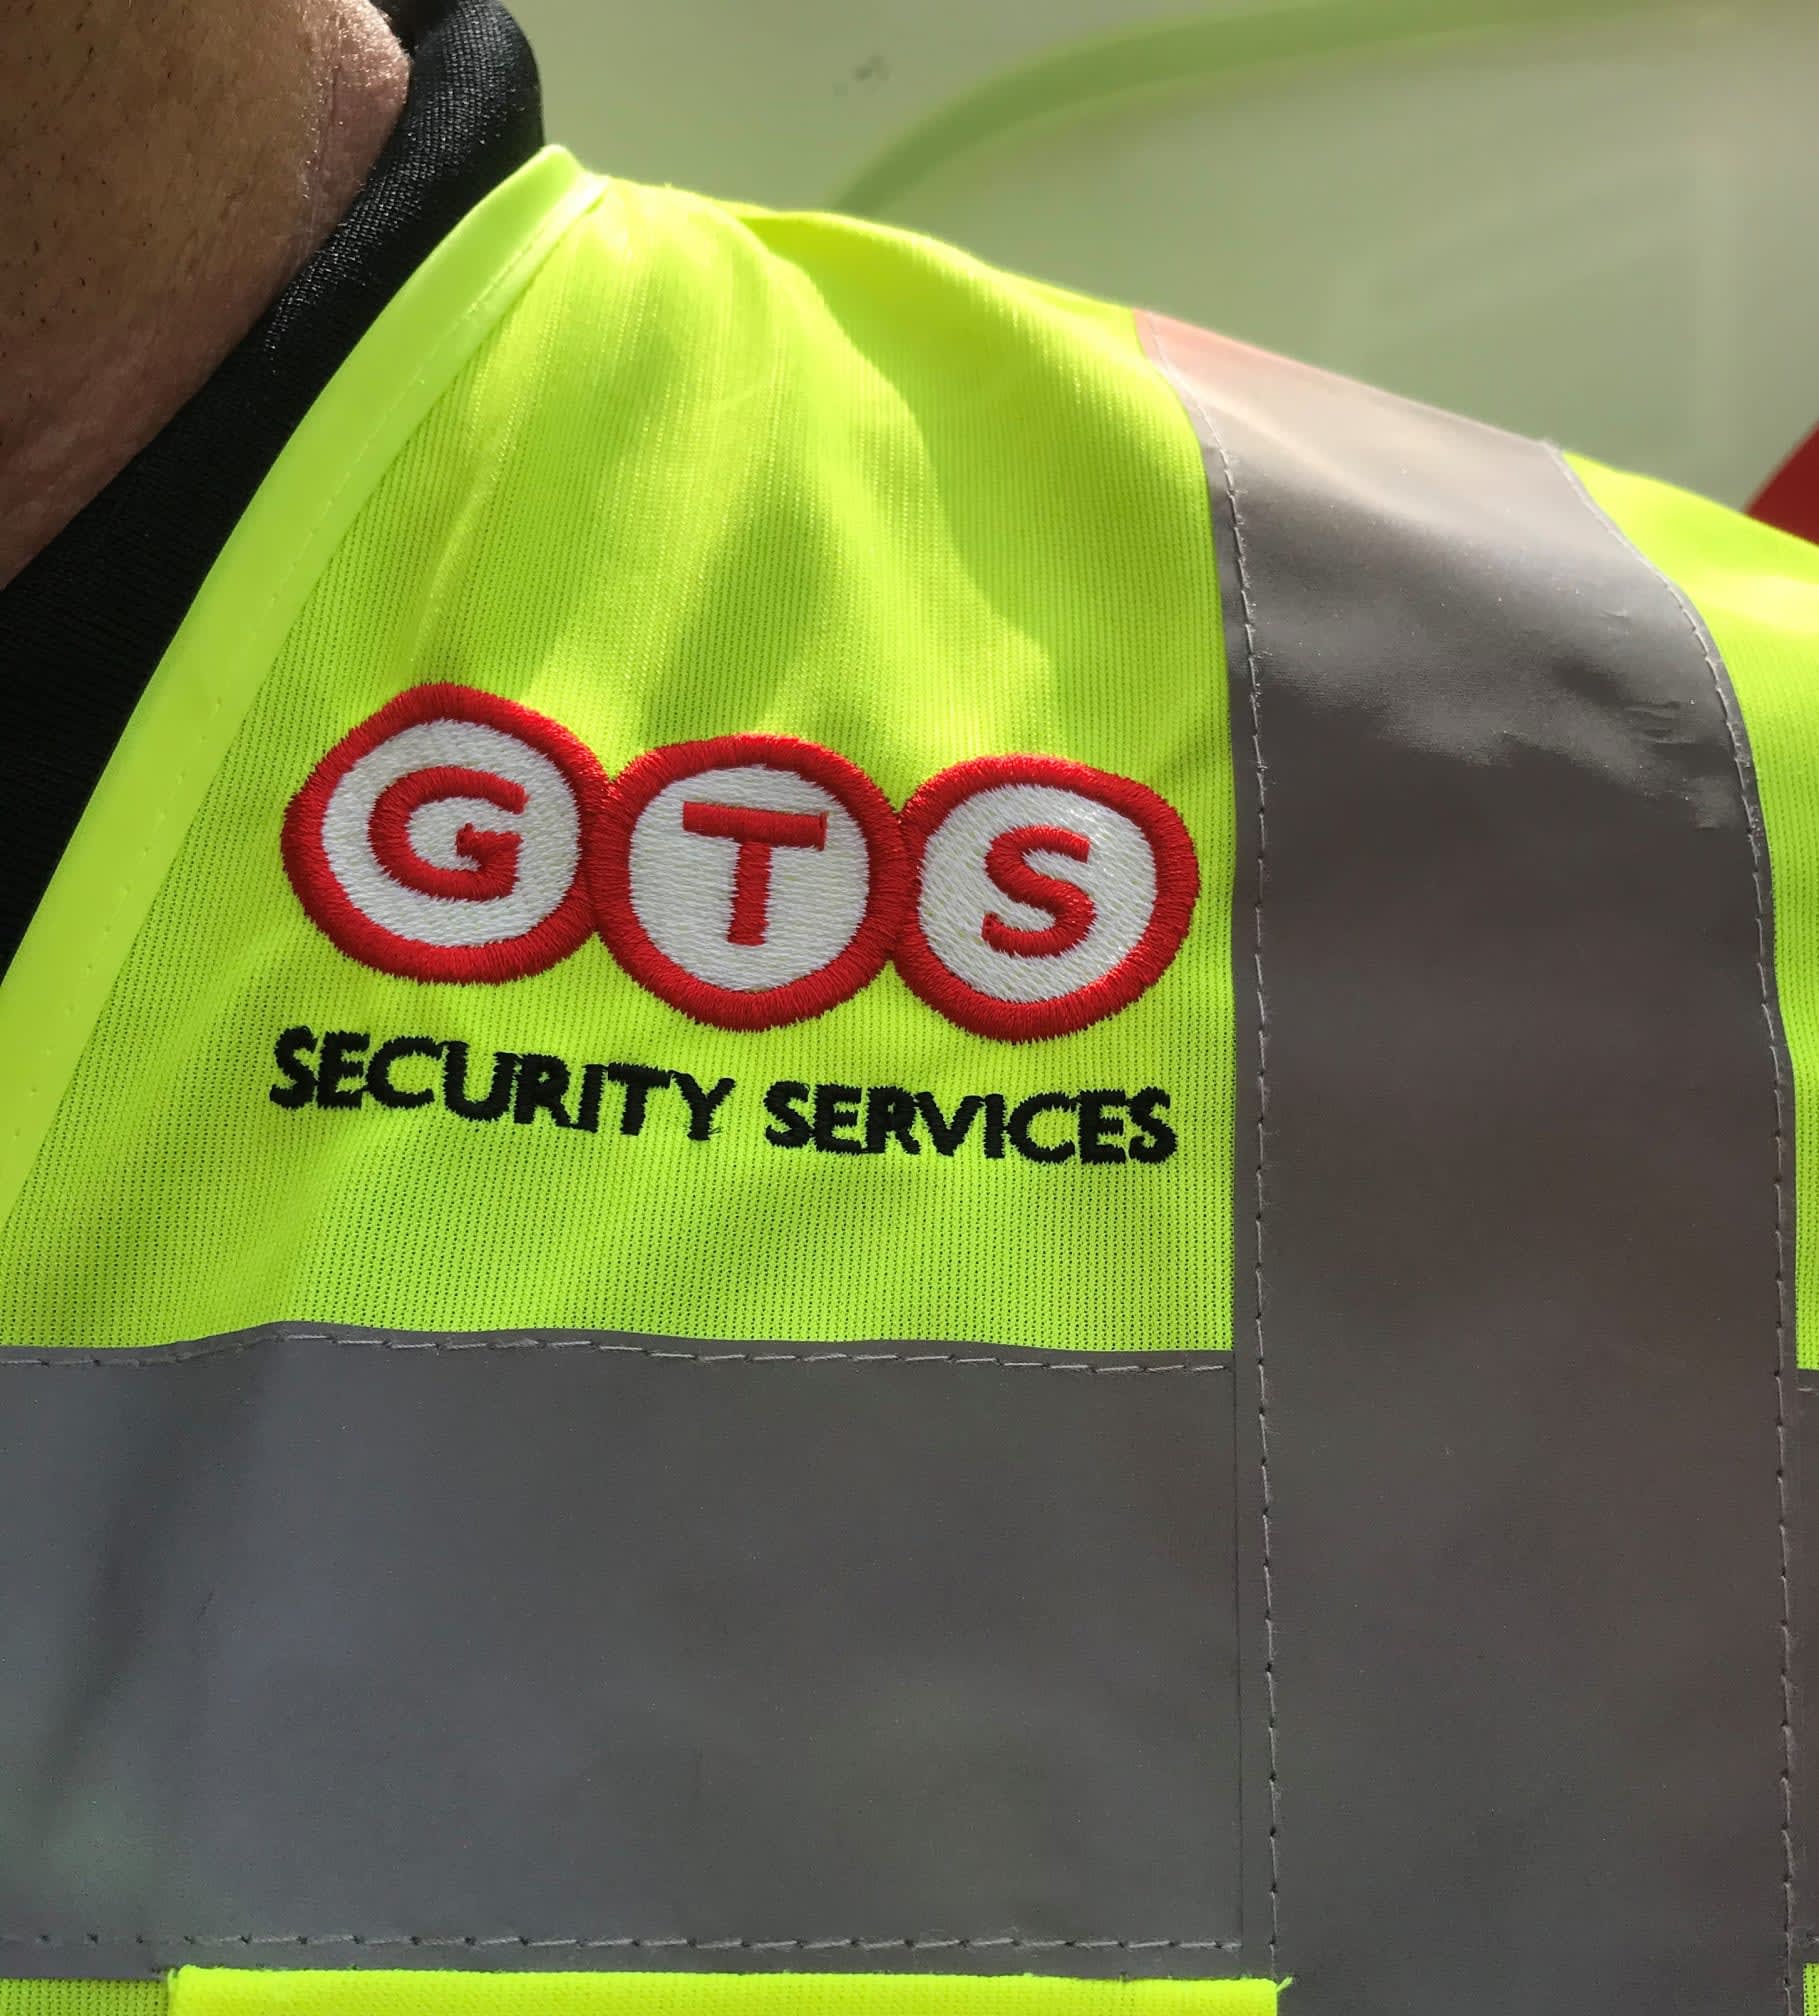 GTS Security Services Ltd Leicester 01162 966068